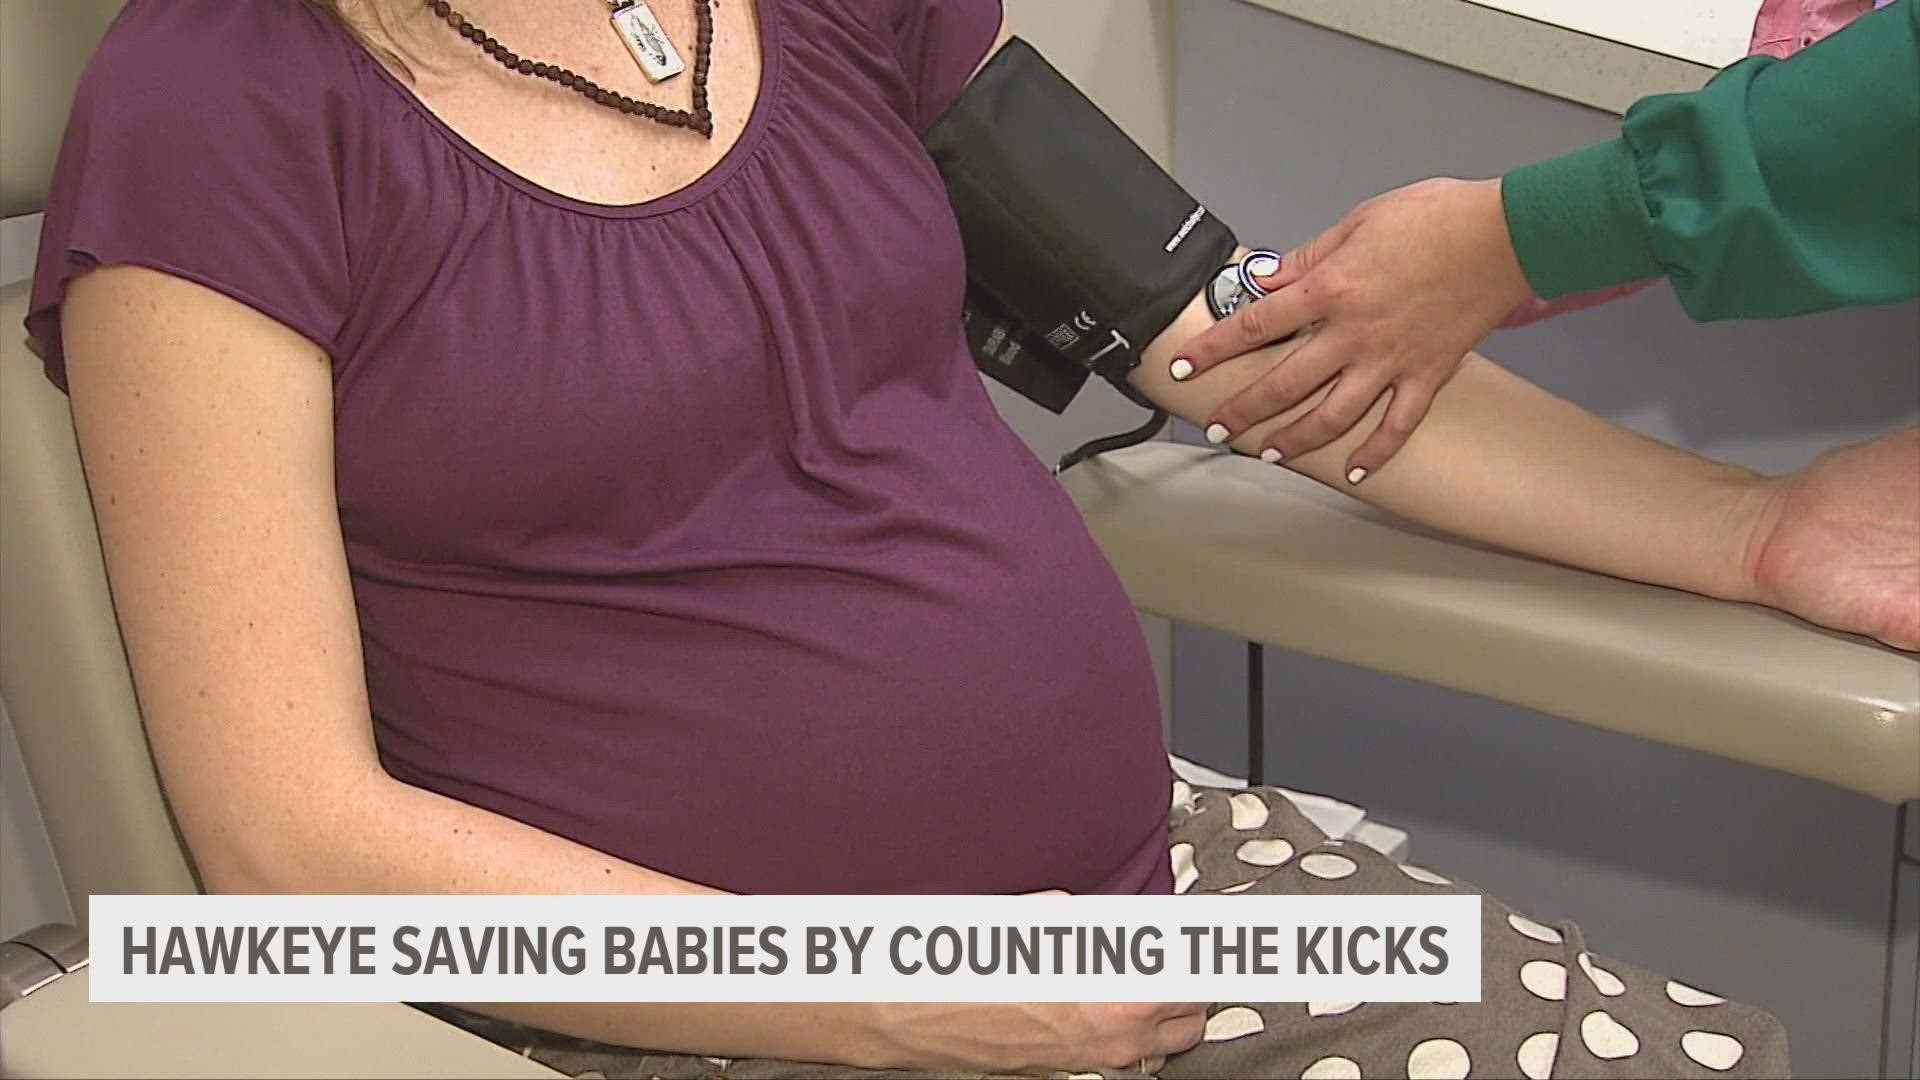 "Count the Kicks" works to make sure expecting parents are aware of their baby's movements during the third trimester of pregnancies.